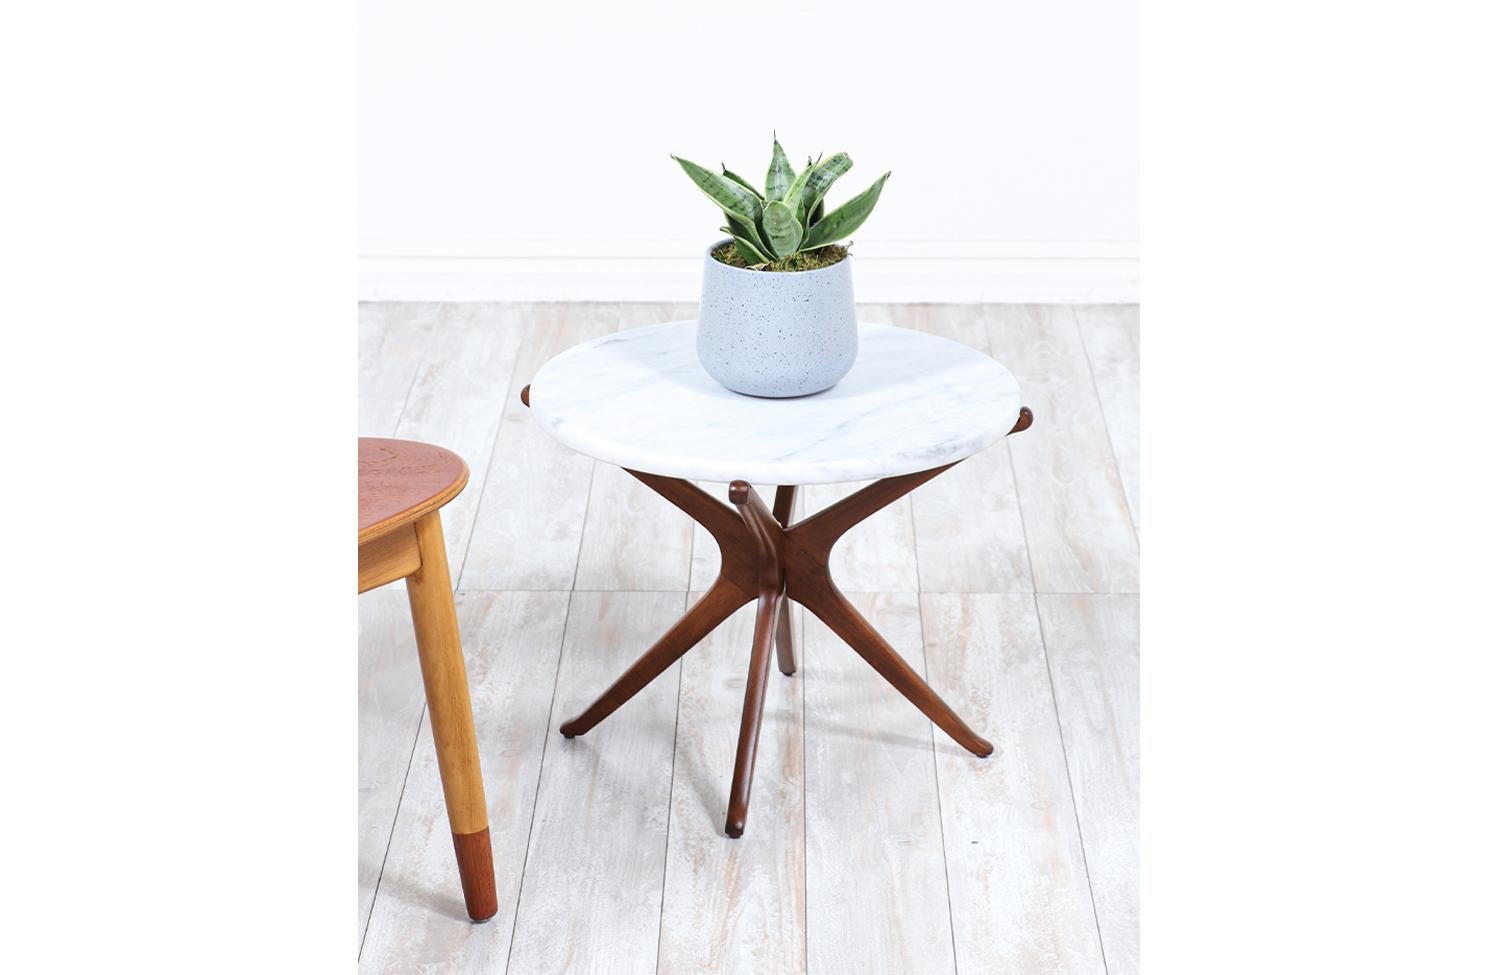 Polished Mid-Century Sculptural Jax Walnut Side Table with Carrara Marble Top